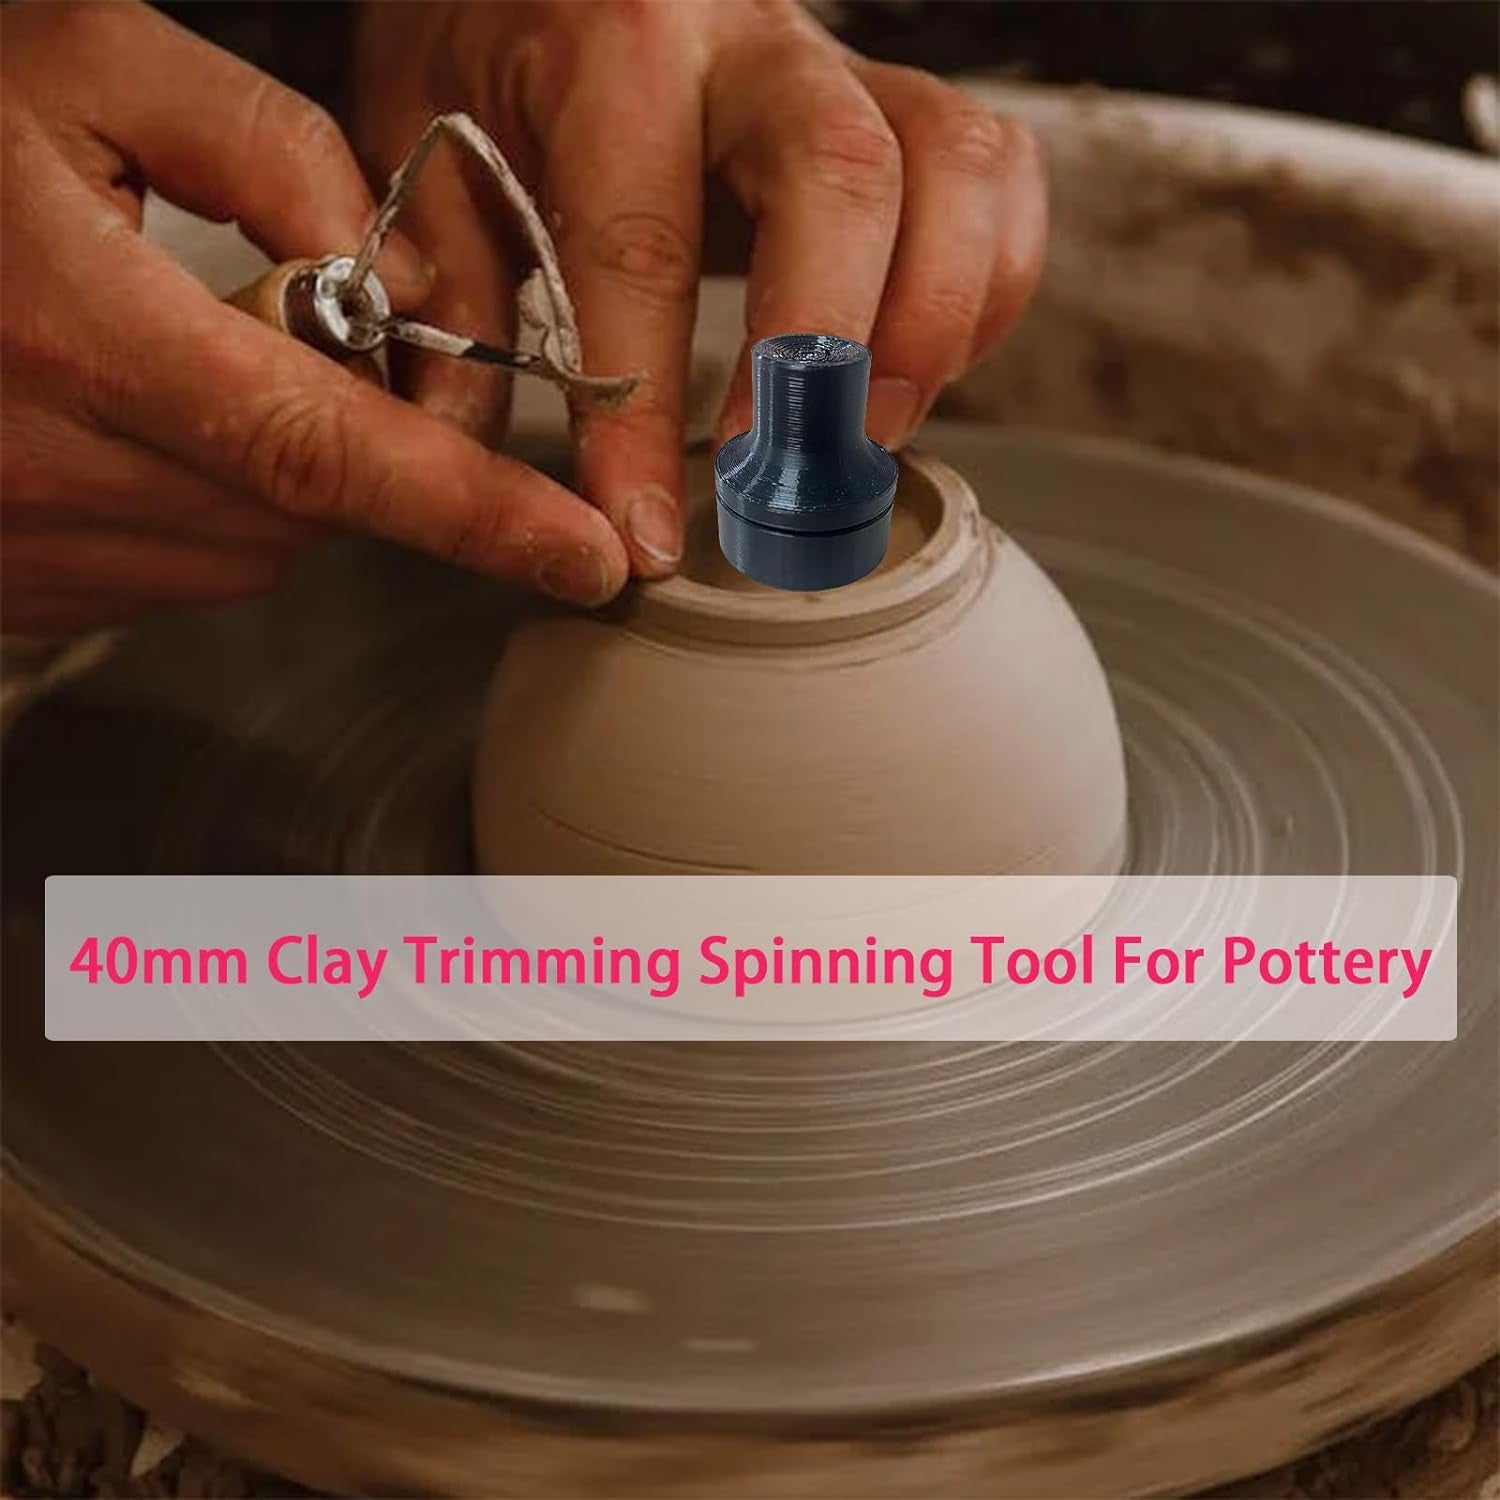 40mm Clay Trimming Spinning Tool for Pottery